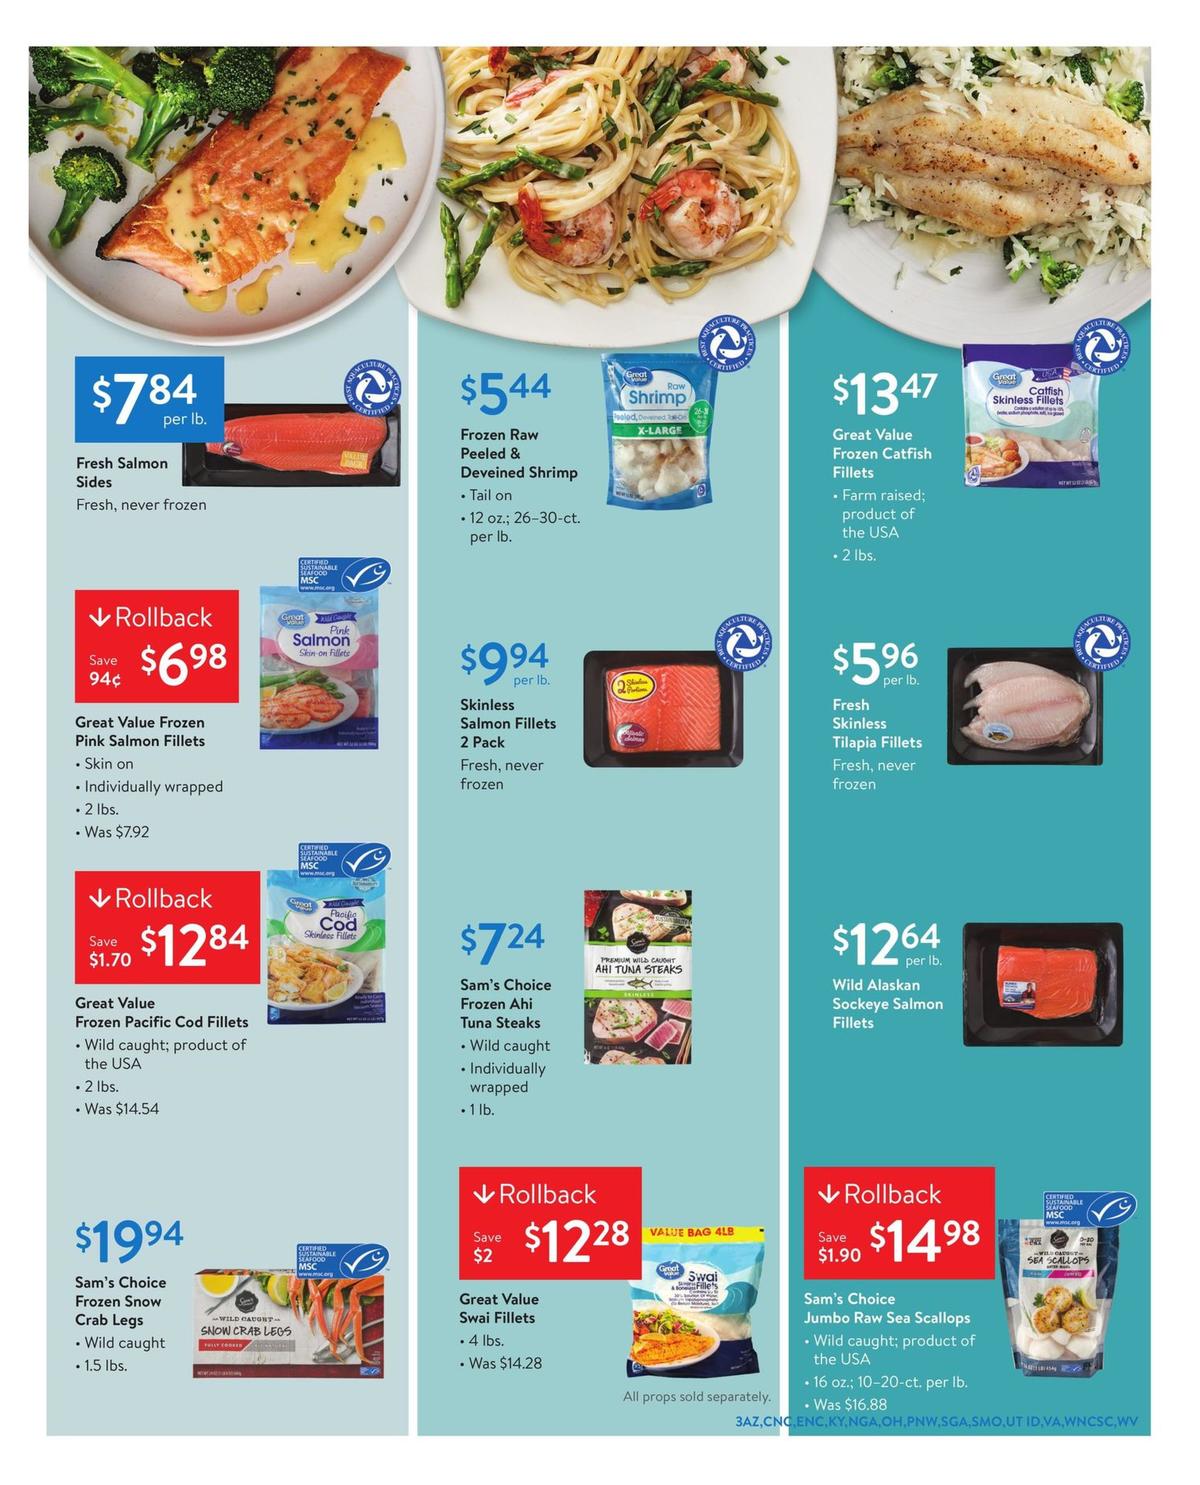 Walmart Weekly Ad from February 28